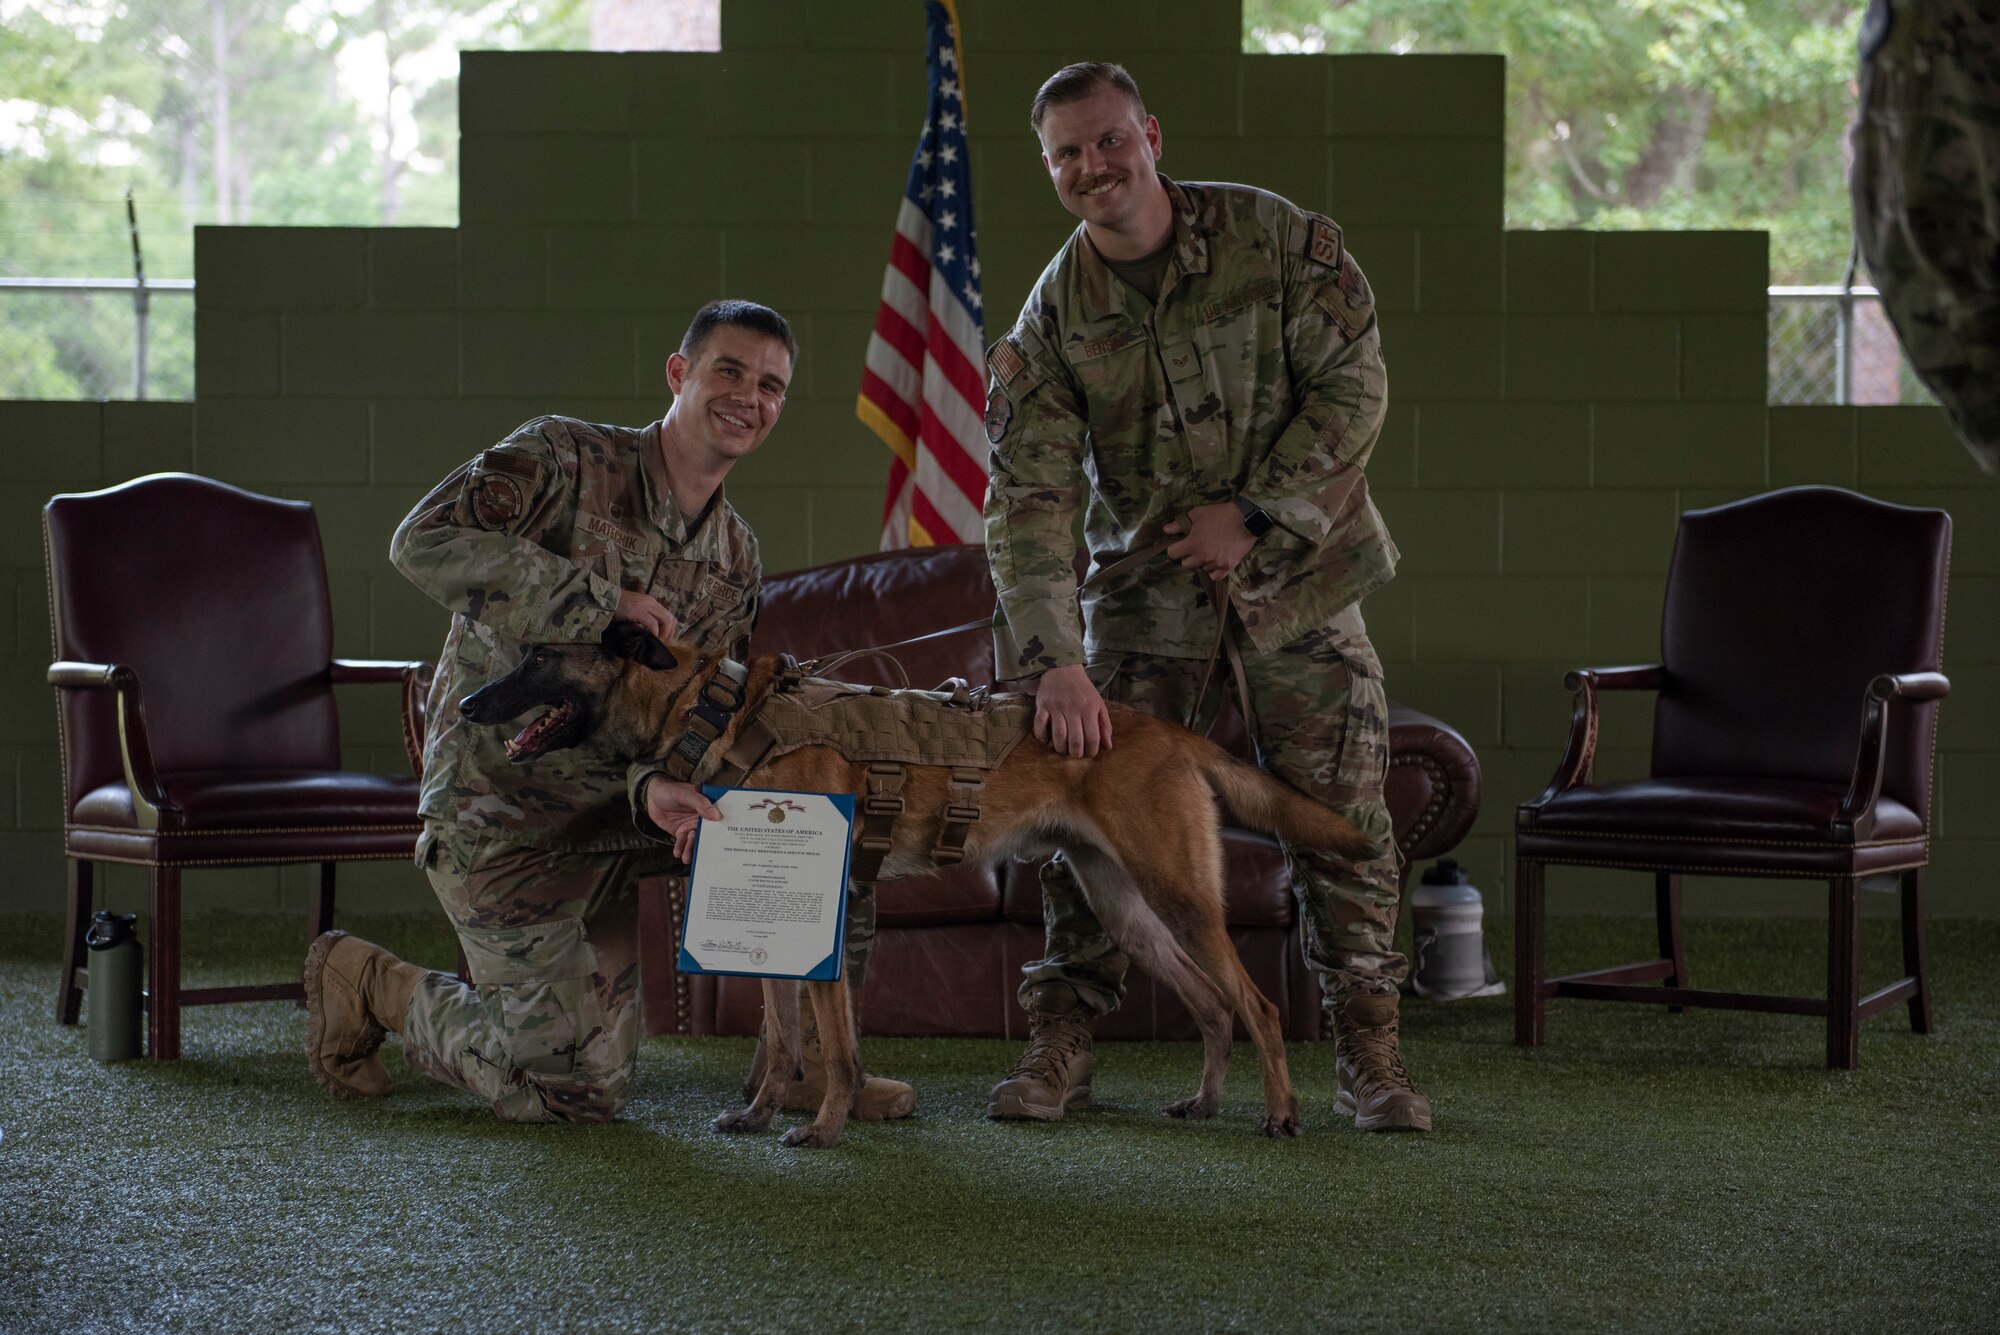 A photo two Airmen standing behind a military working dog. One Airman is holding a medal.